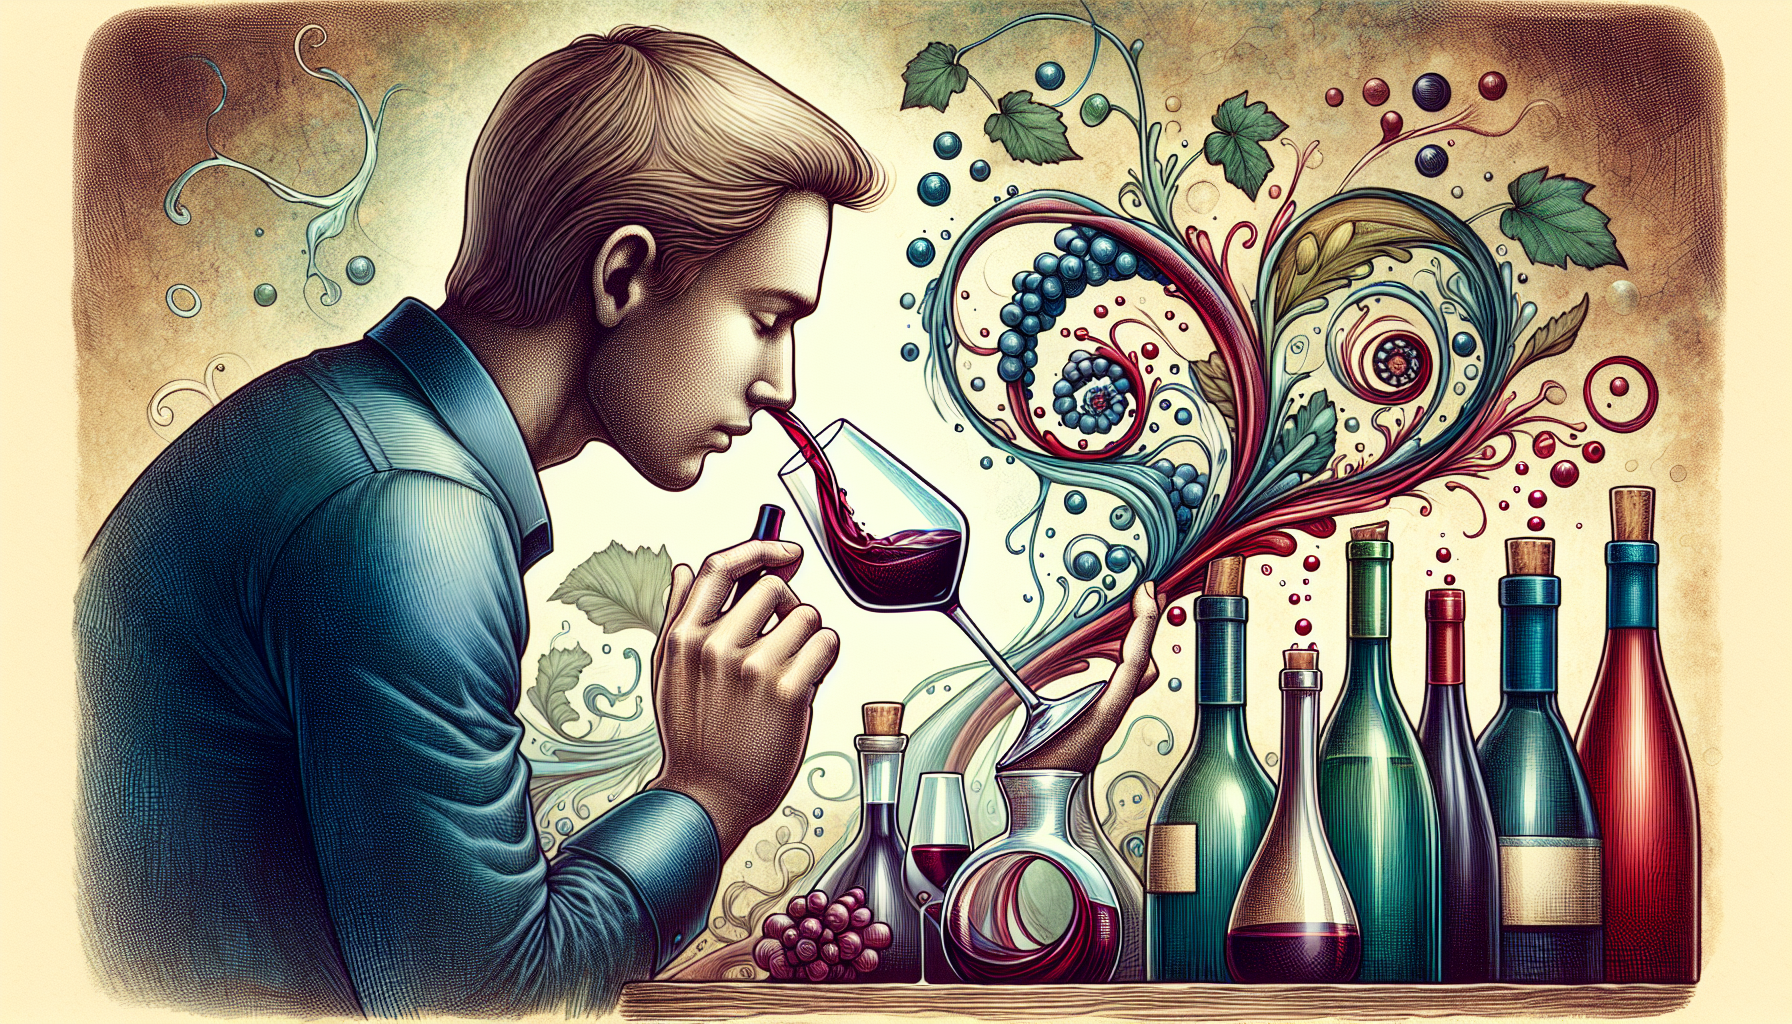 Illustration of a person engaging in wine tasting with various wine glasses and bottles